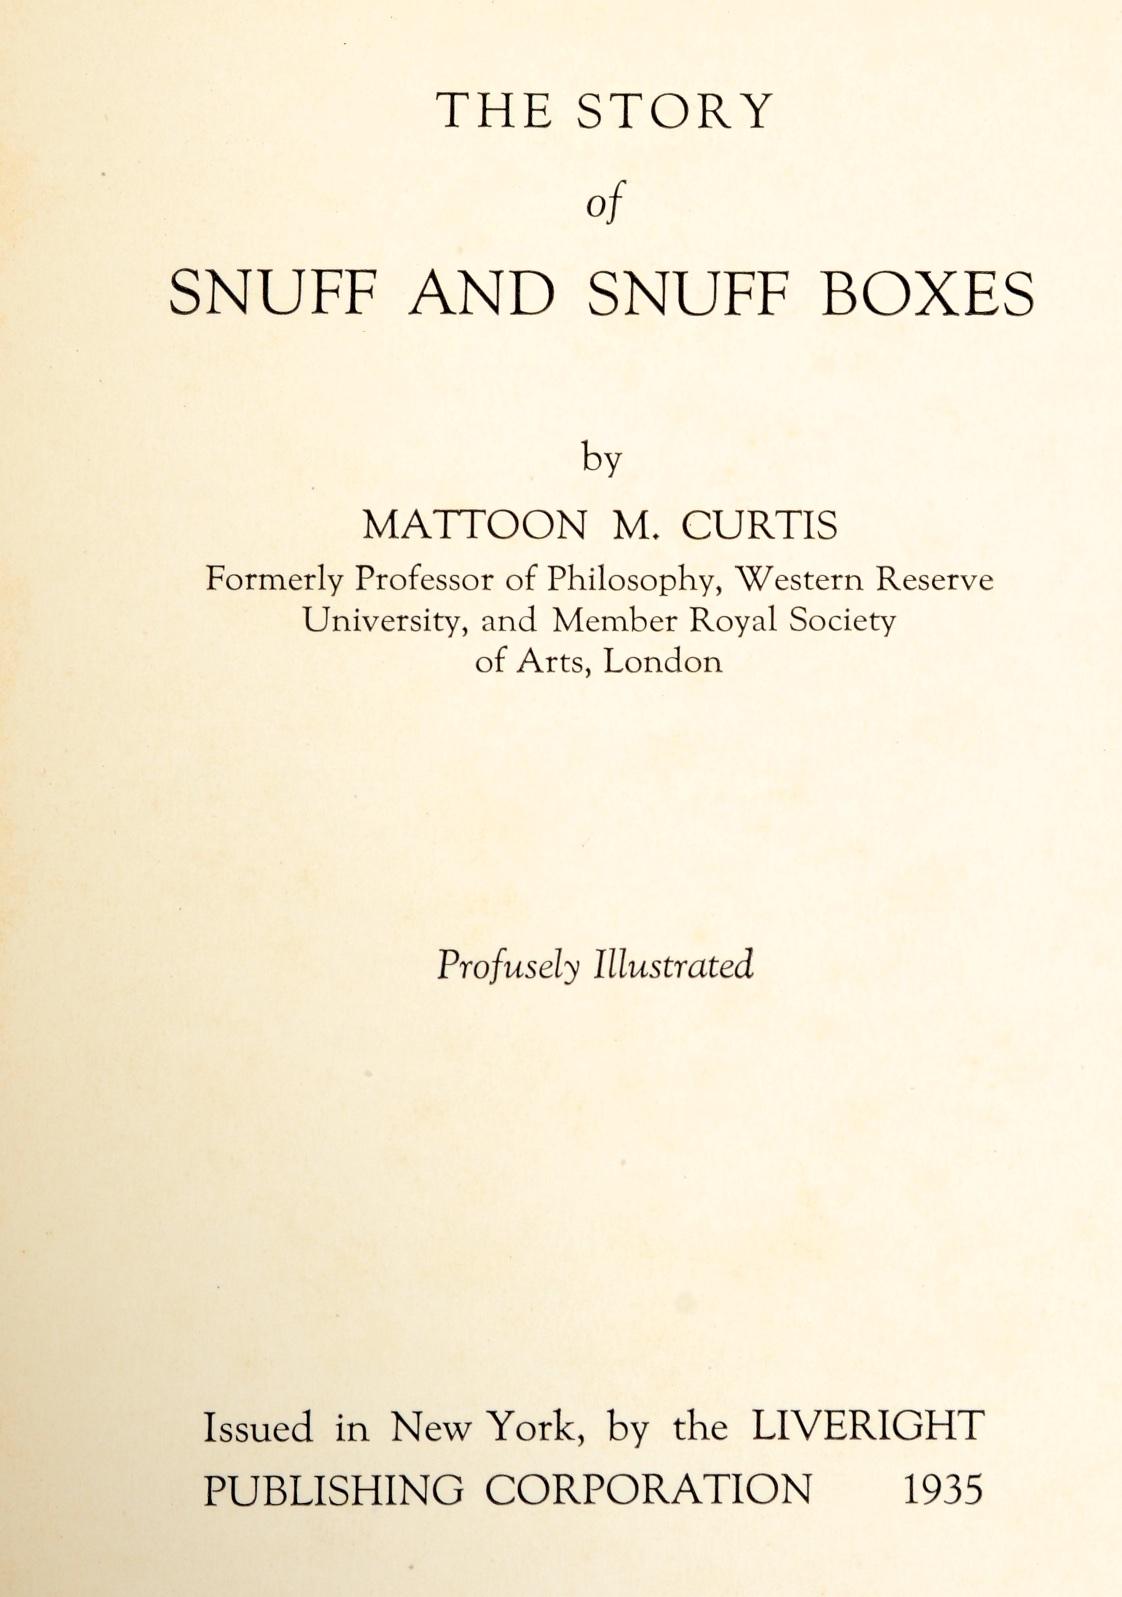 'The Story of Snuff and Snuff Boxes', Mattoon M. Curtis First Edition Inscribed 14